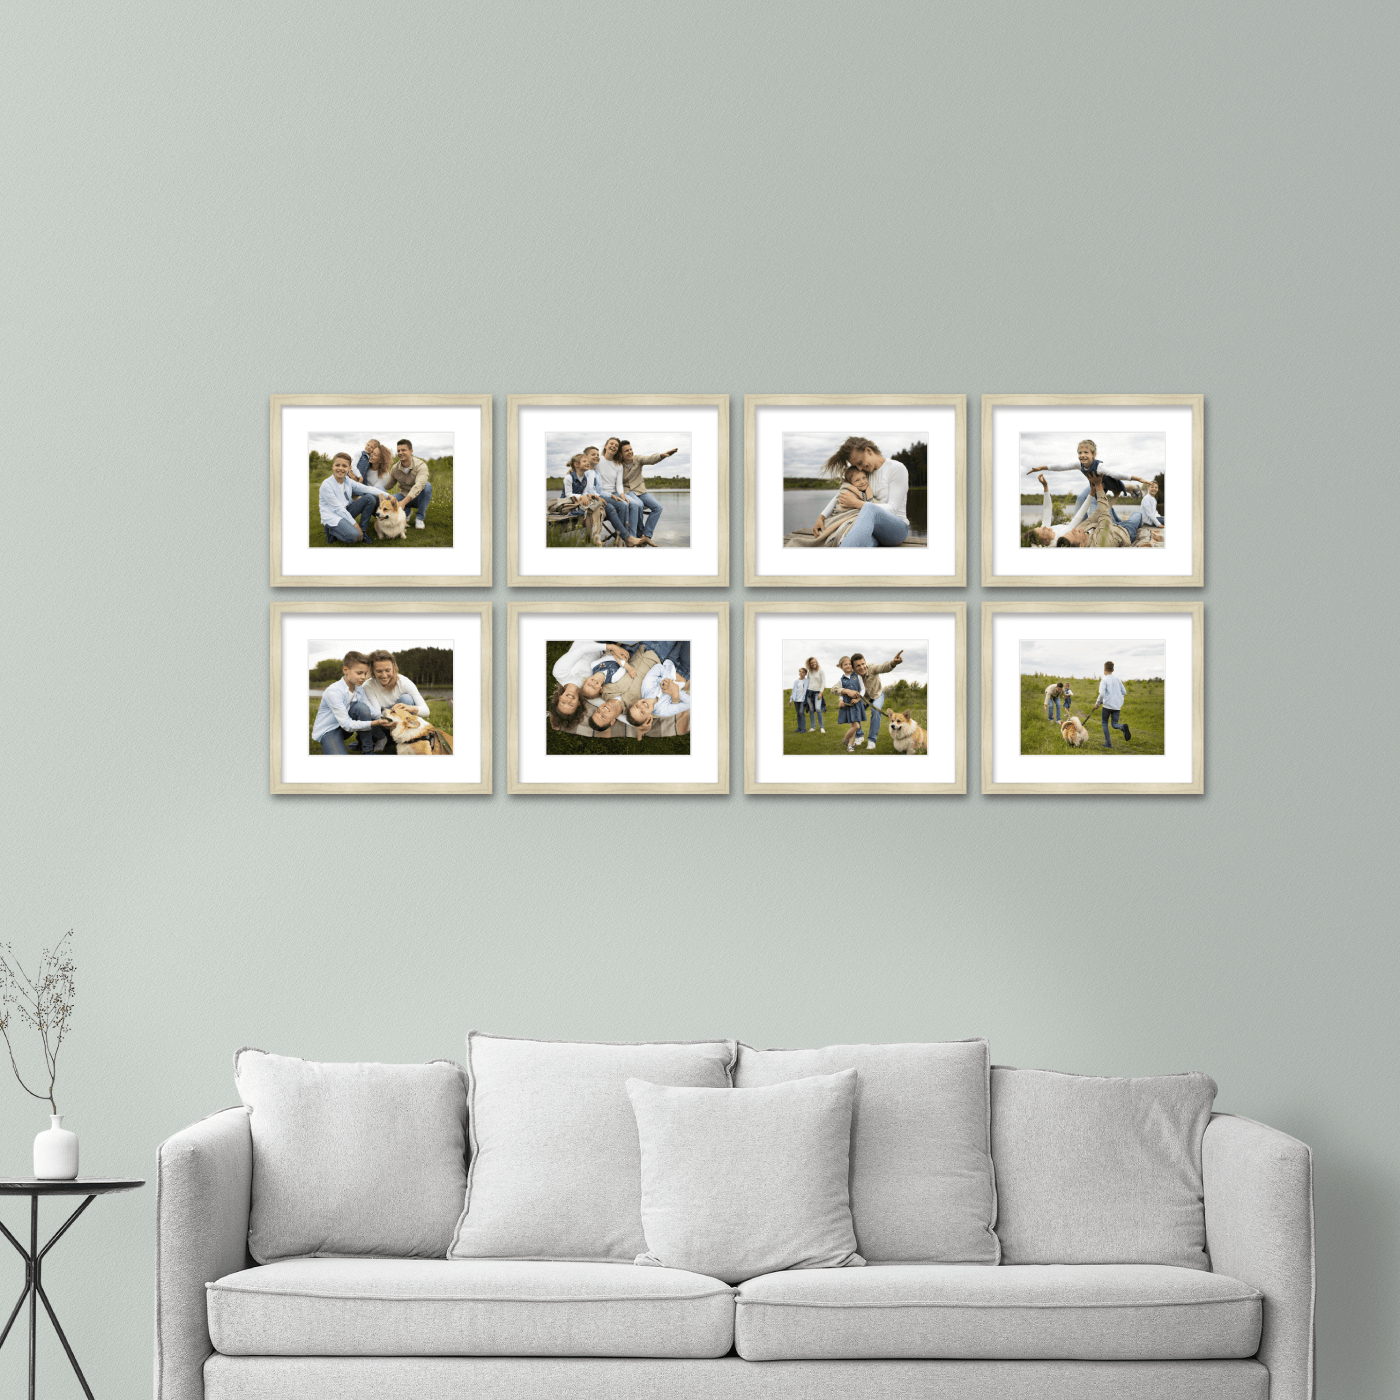 66" x 28" Gallery Wall Wooden Frame (Set of 8)